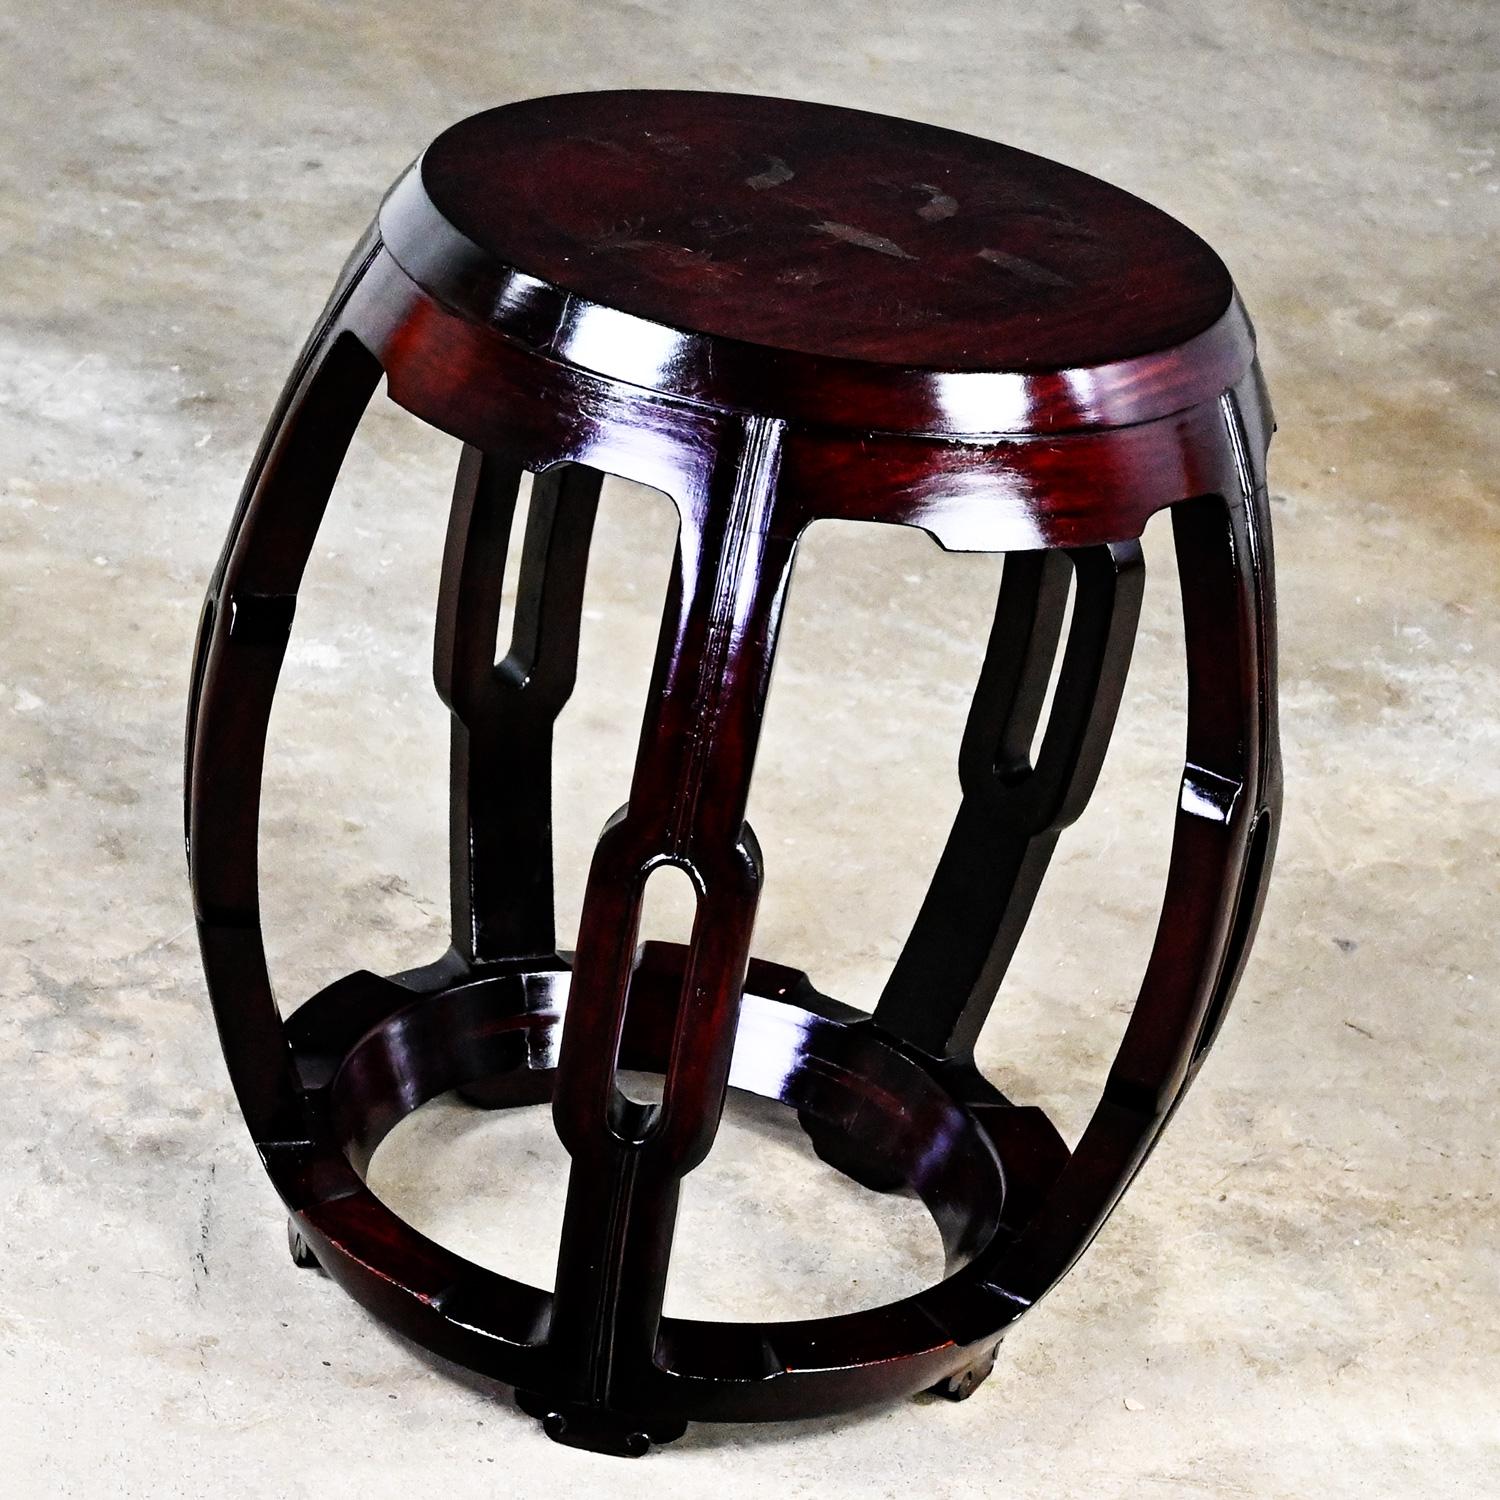 Mid 20th Century Chinoiserie Asian Rosewood Barrel Drum Table or Garden Stool For Sale 7